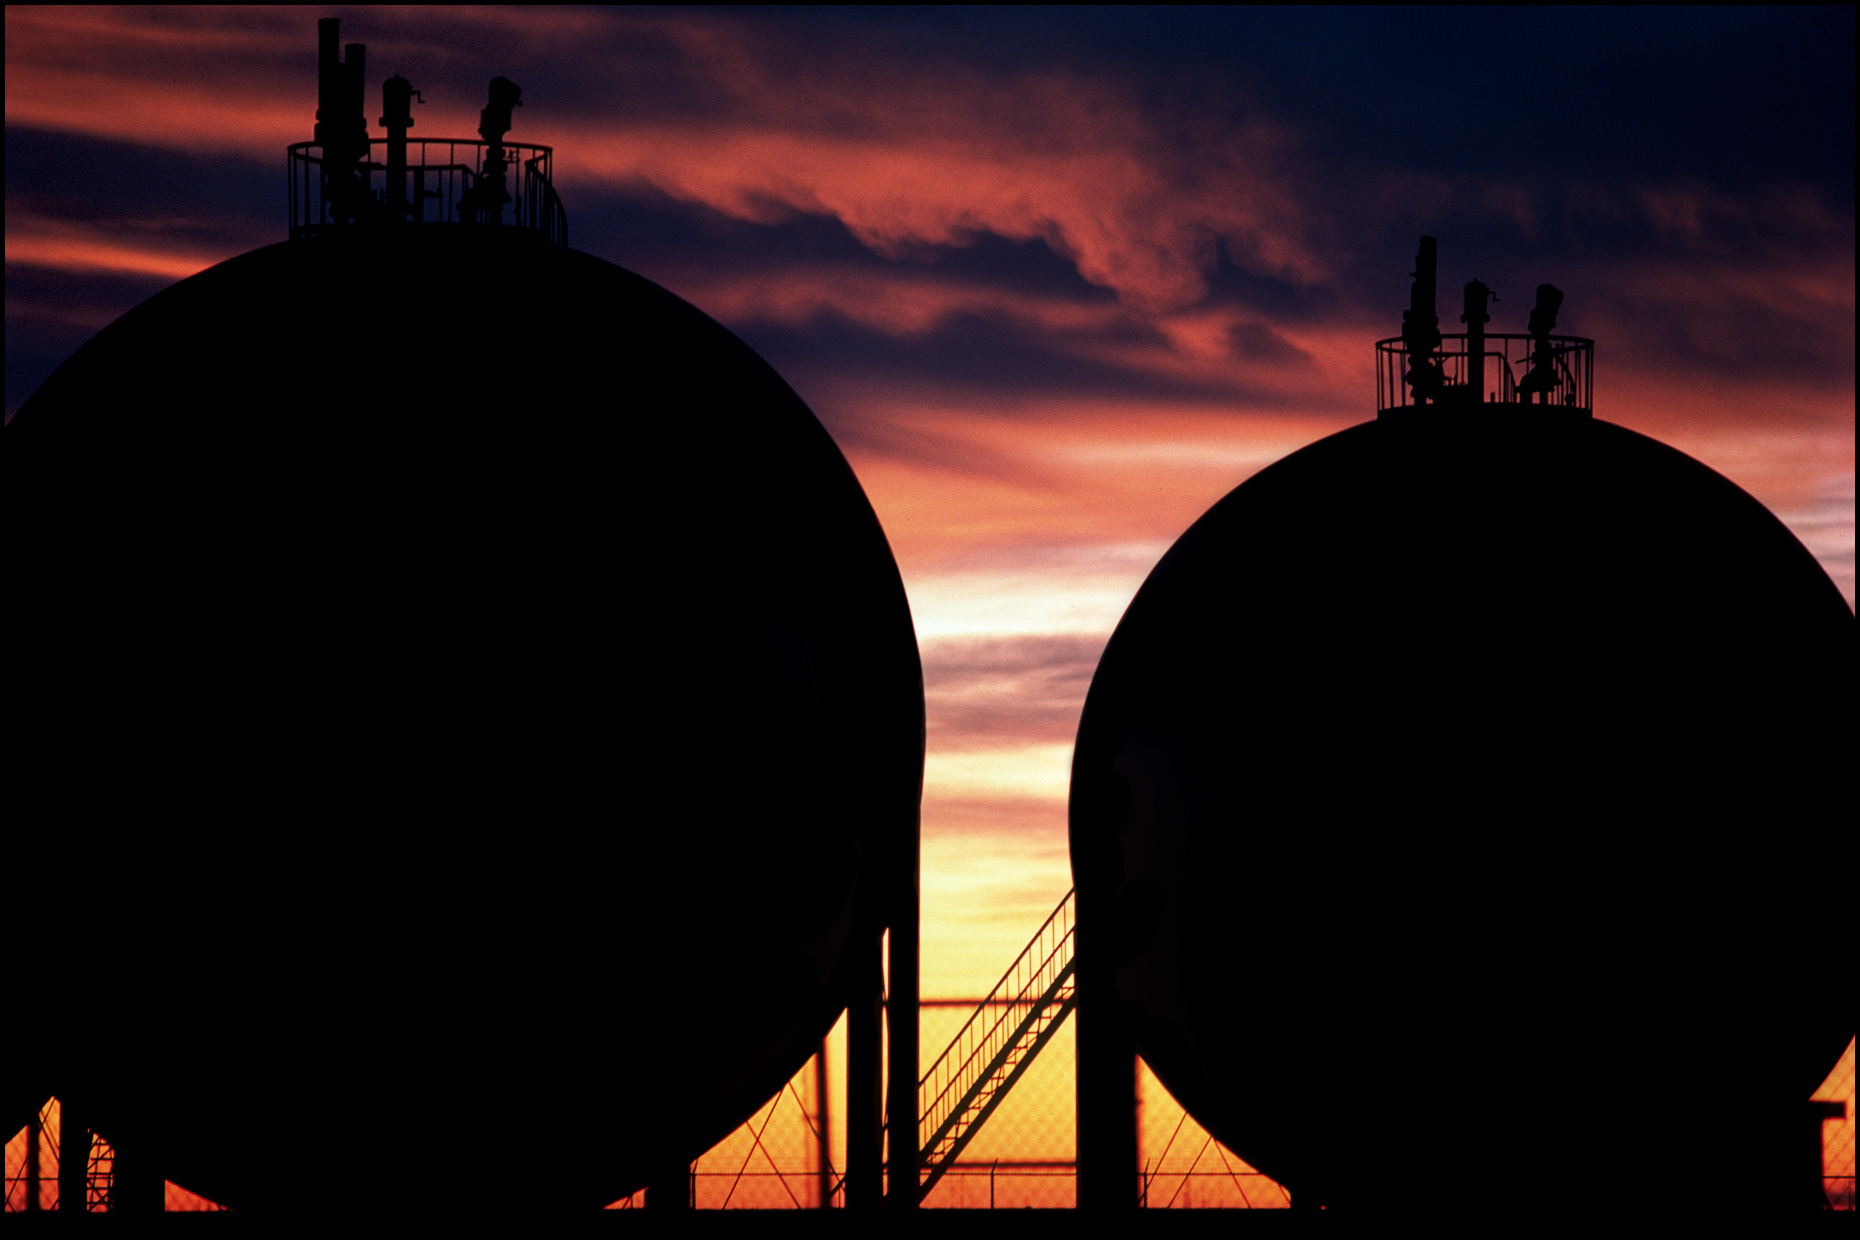 Silhouettes of hydrocarbon storage tanks against a dramatic sunset.